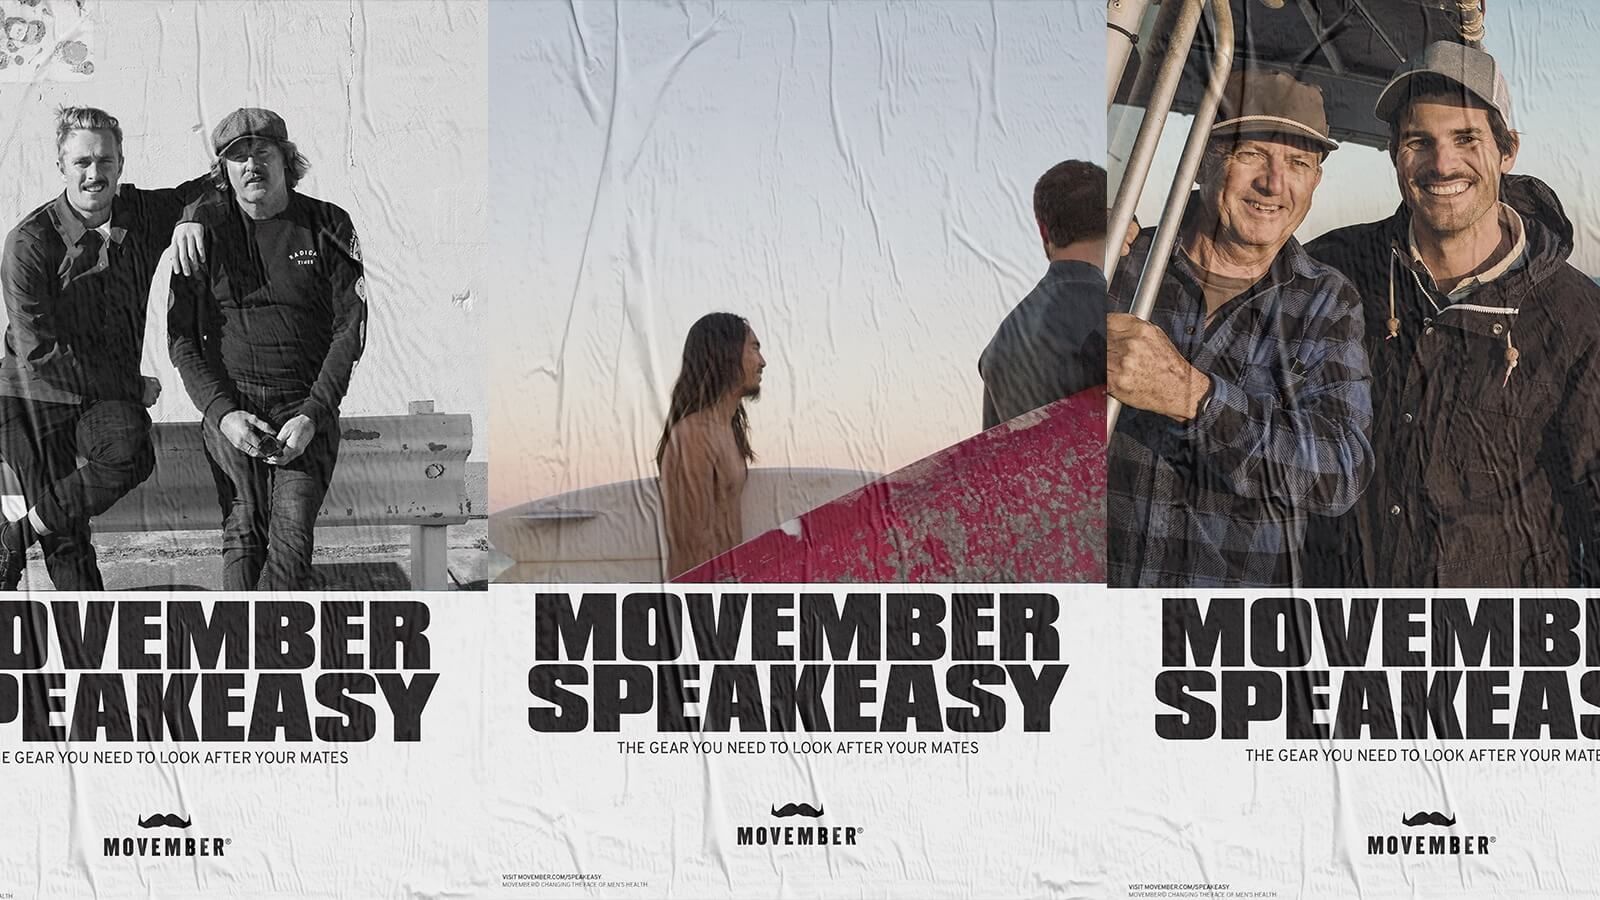 Three adjacent mural posters, showing men smiling to camera. A large black caption on each reads: "MOVEMBER SPEAKEASY".